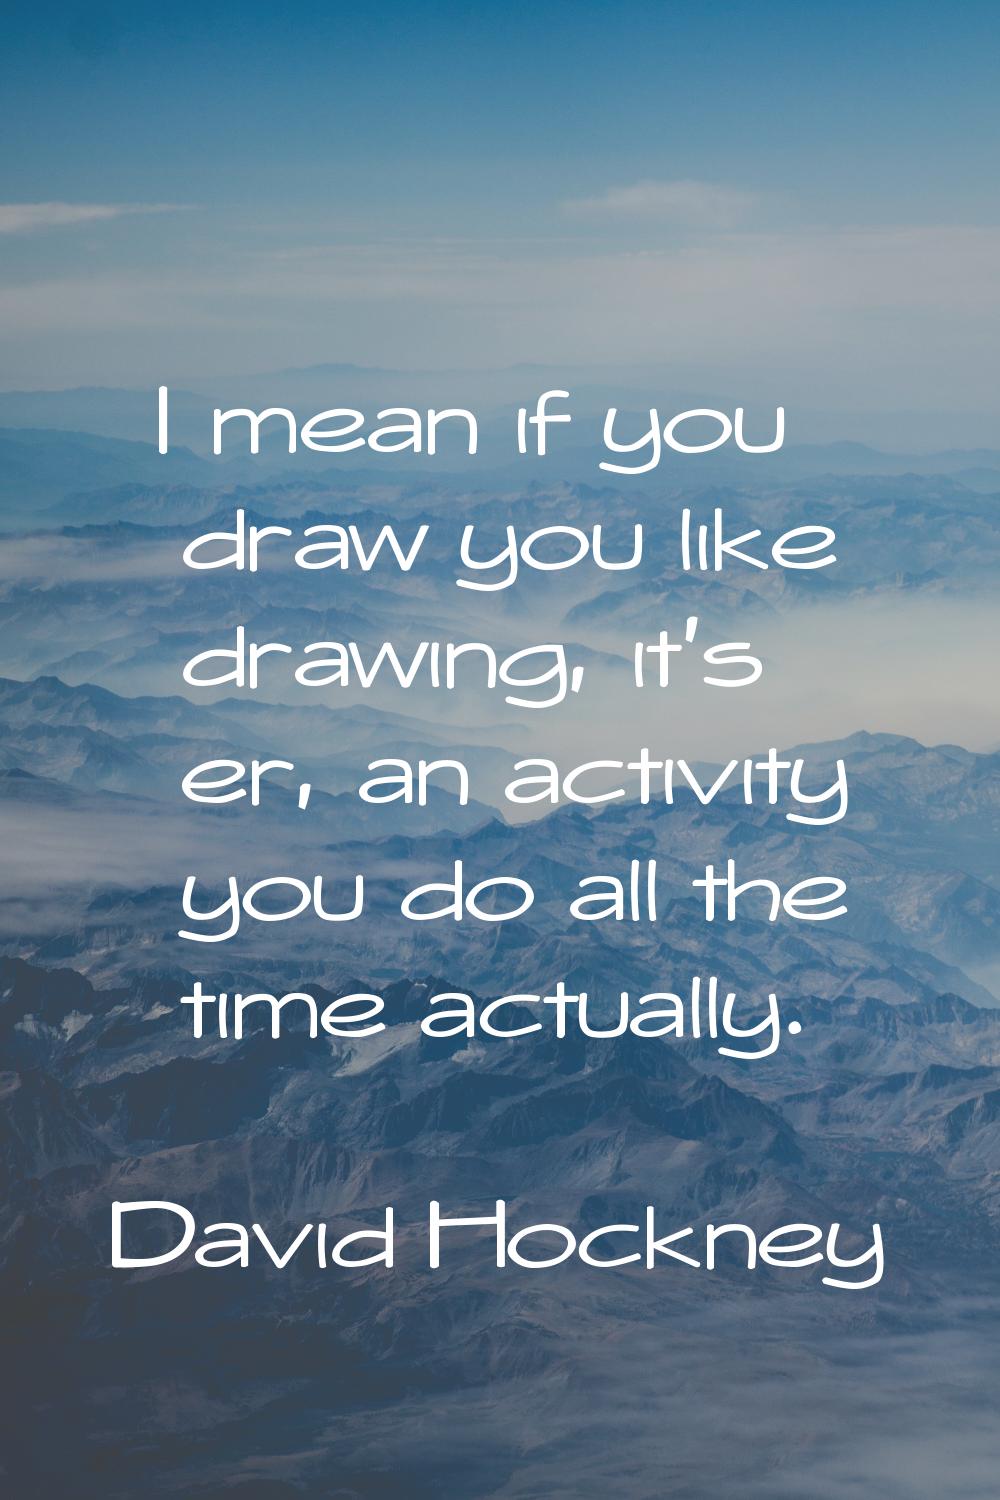 I mean if you draw you like drawing, it's er, an activity you do all the time actually.